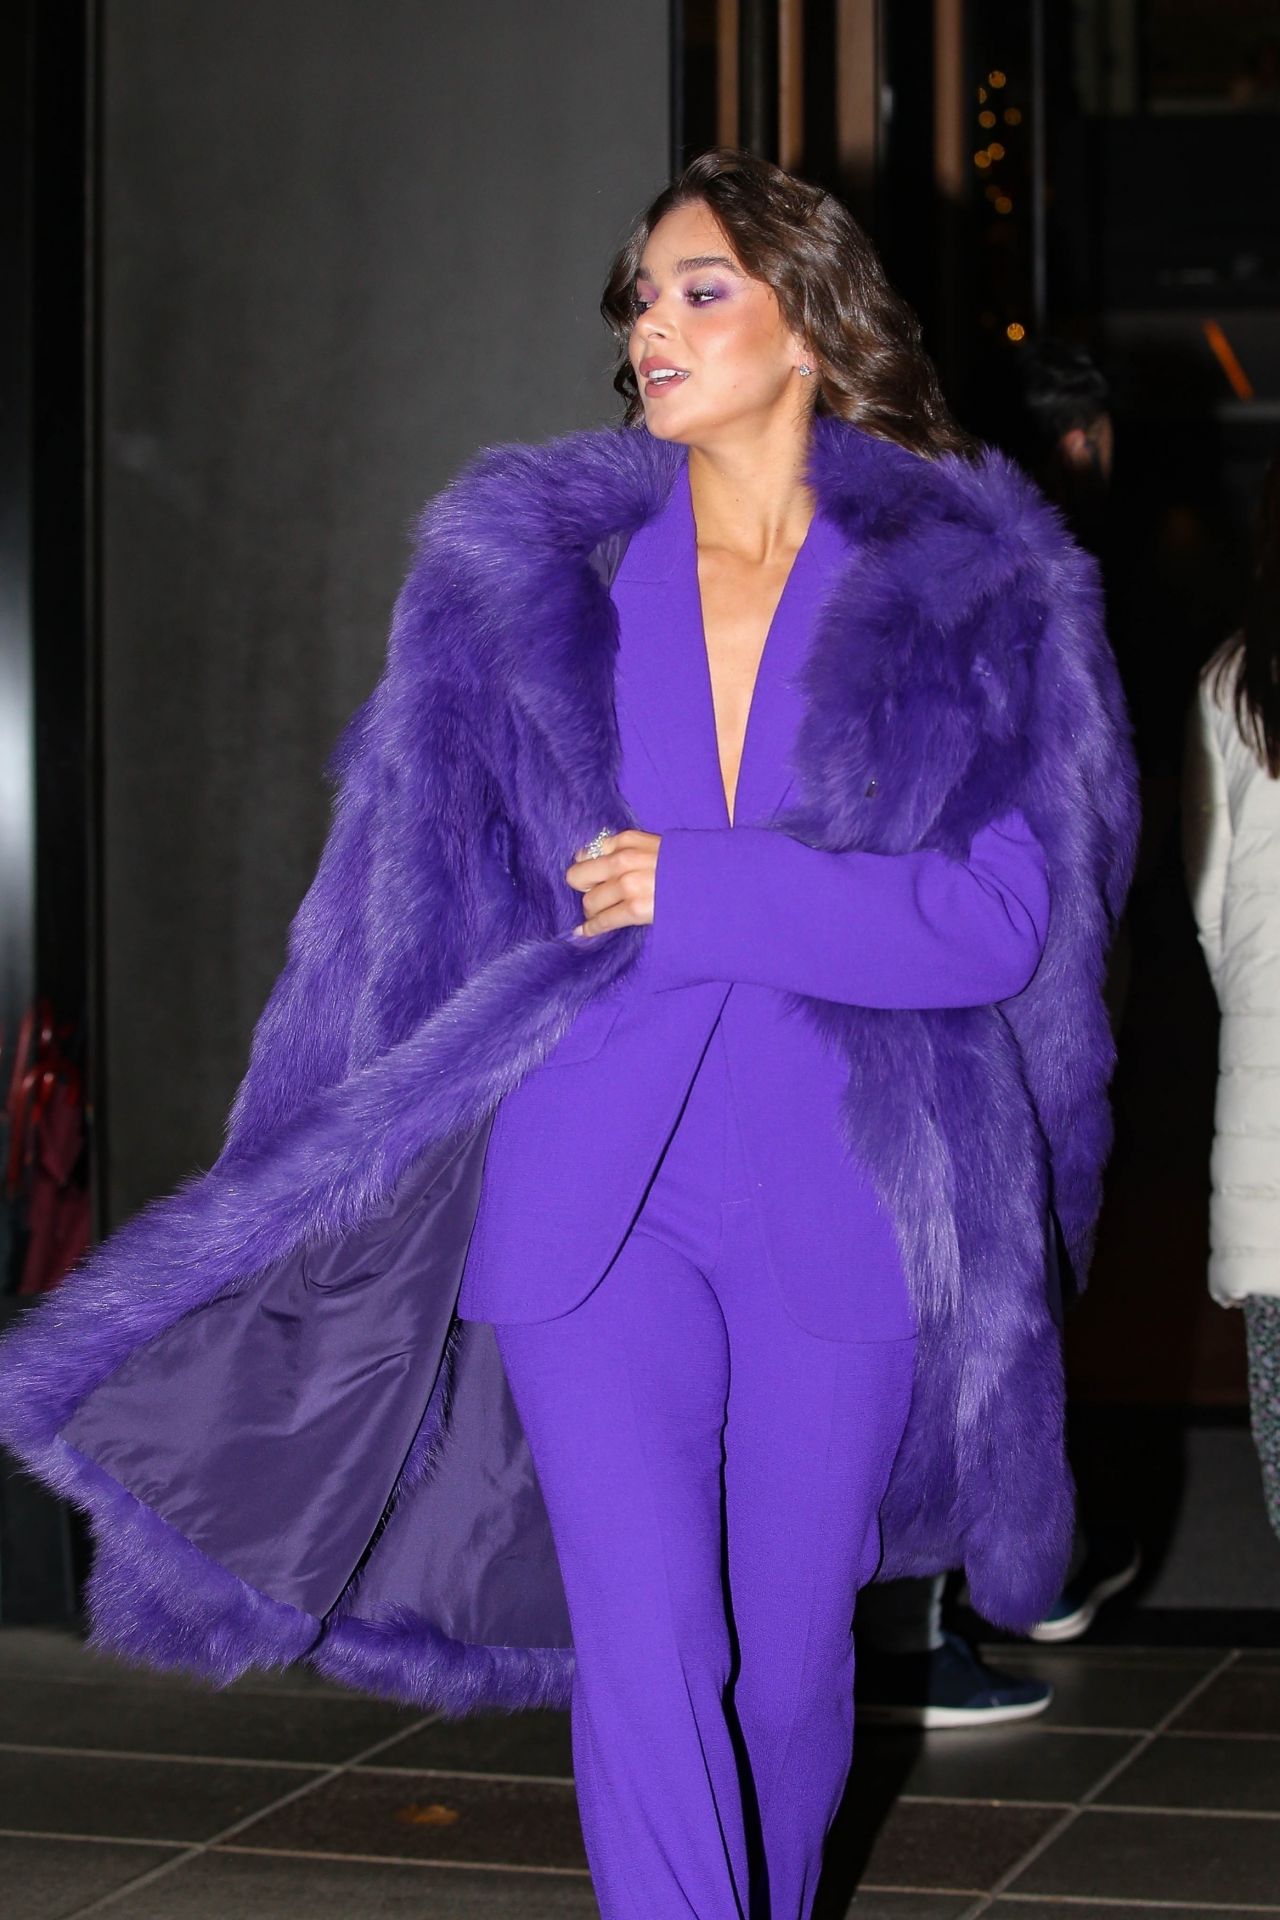 Hailee Steinfeld in a Purple Outfit - The Dominick Hotel in NYC 11/22 ...